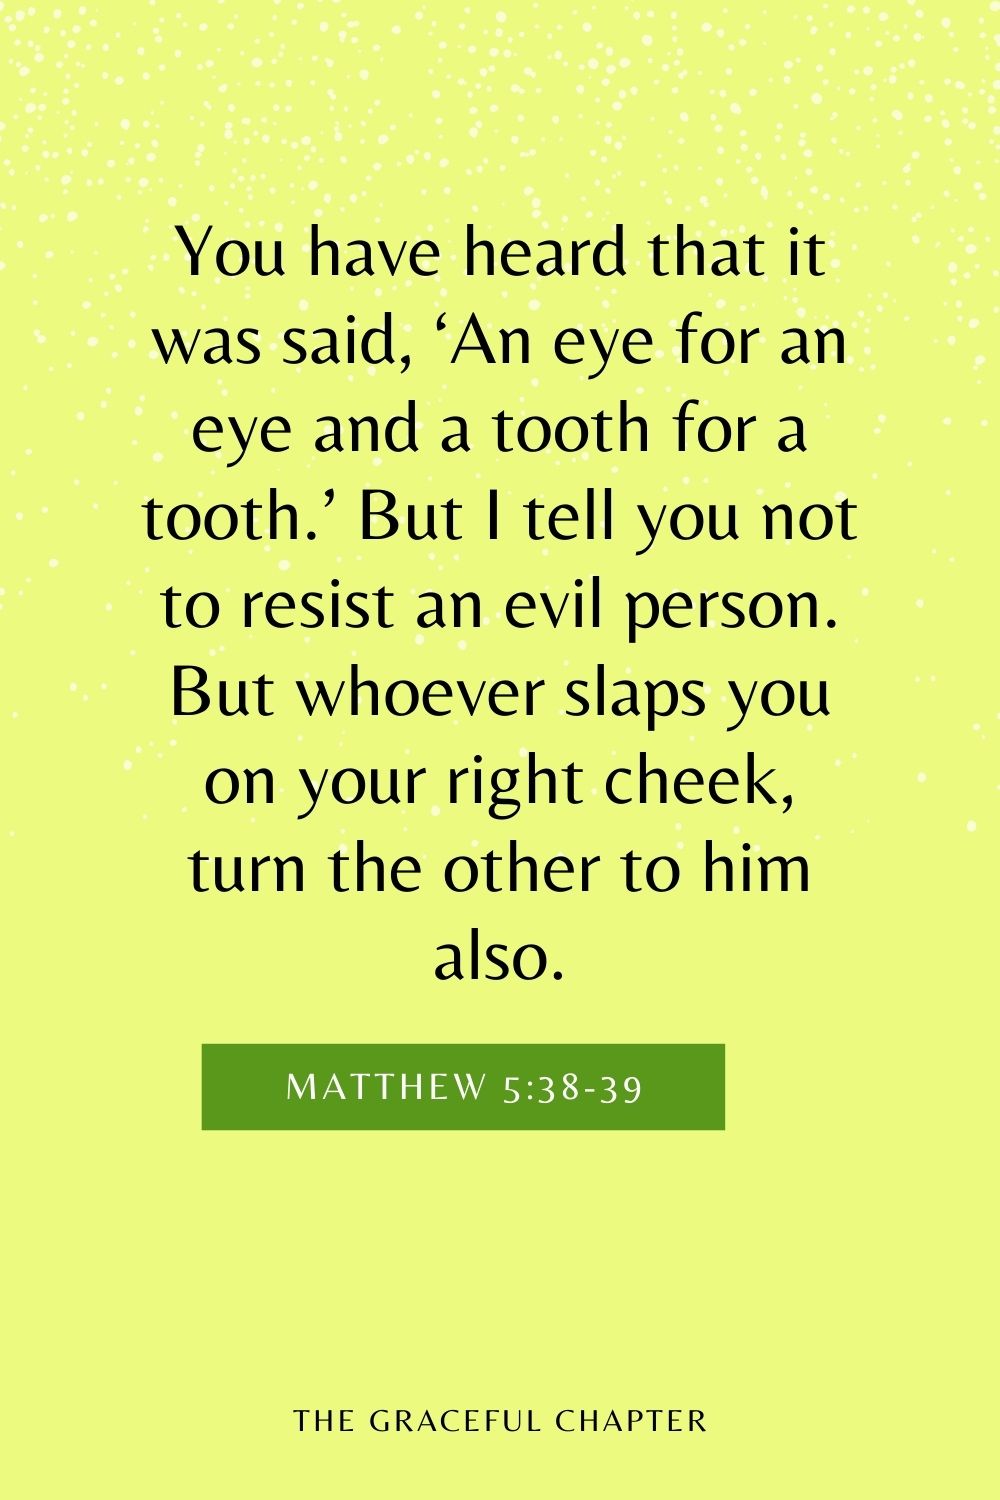 You have heard that it was said, ‘An eye for an eye and a tooth for a tooth.’ But I tell you not to resist an evil person. But whoever slaps you on your right cheek, turn the other to him also. Matthew 5:38-39